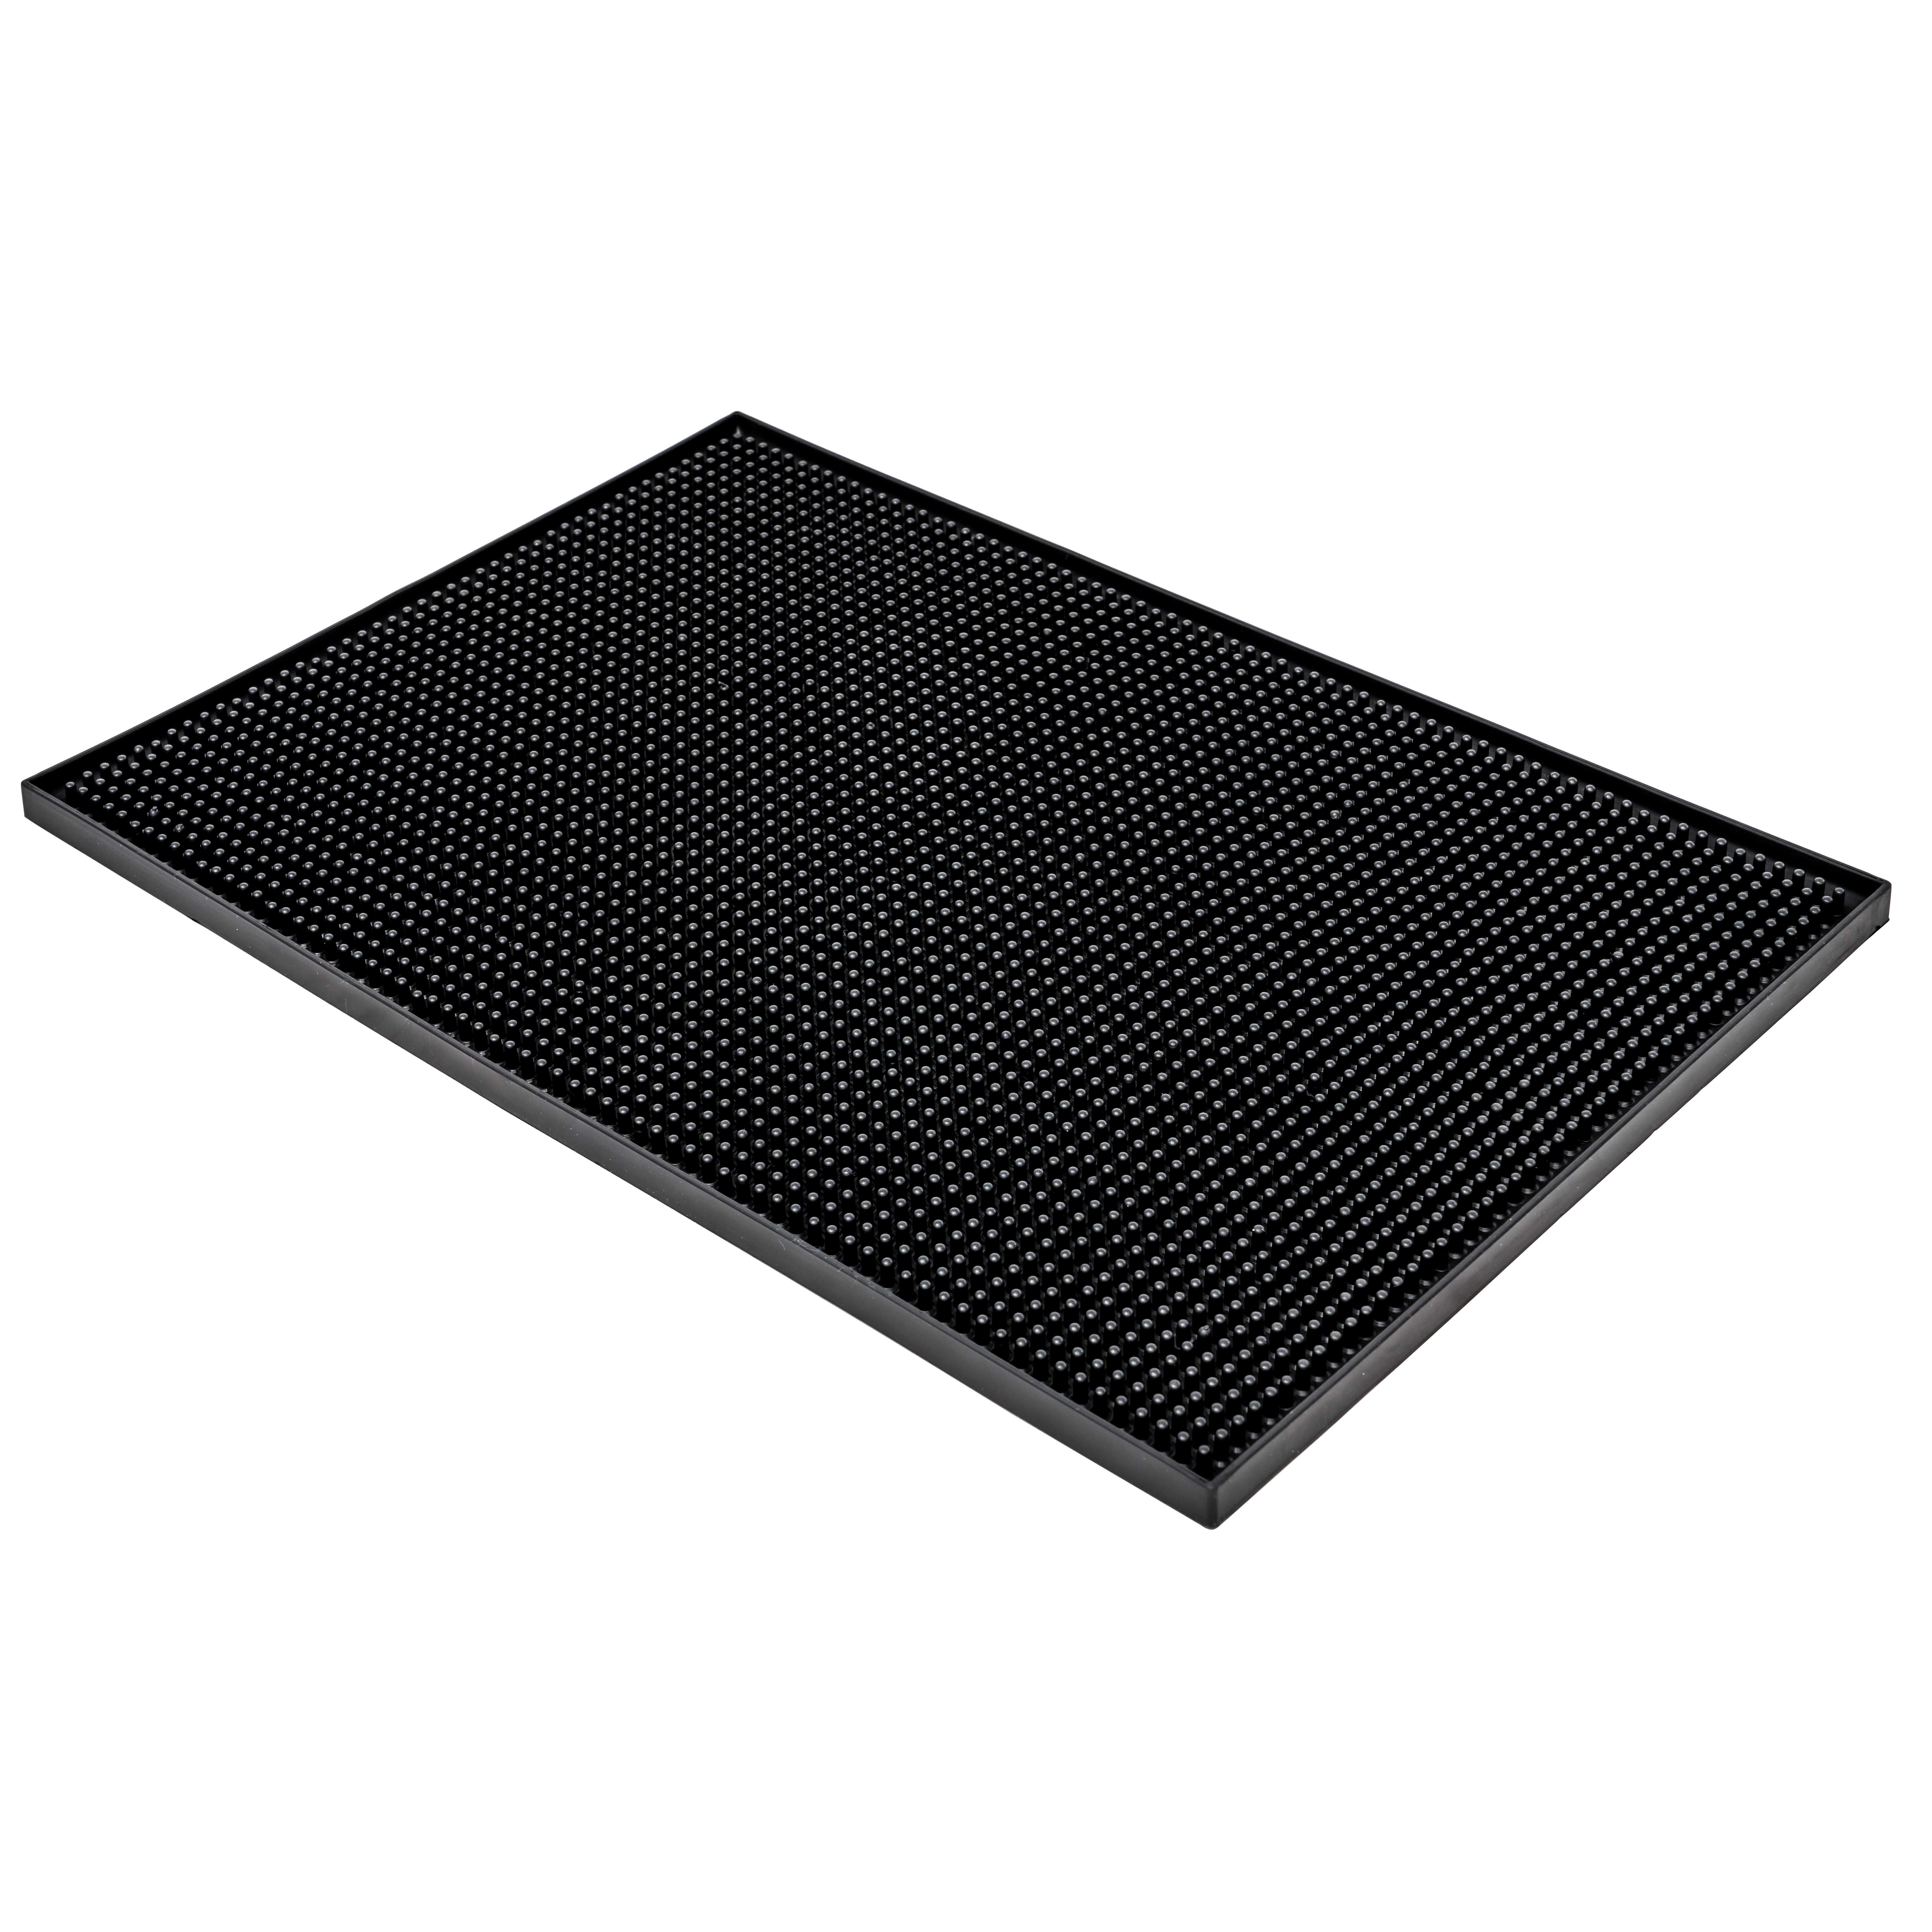 Black Winco 18-Inch x 12-Inch Service Mats Set of 3 by Winco US